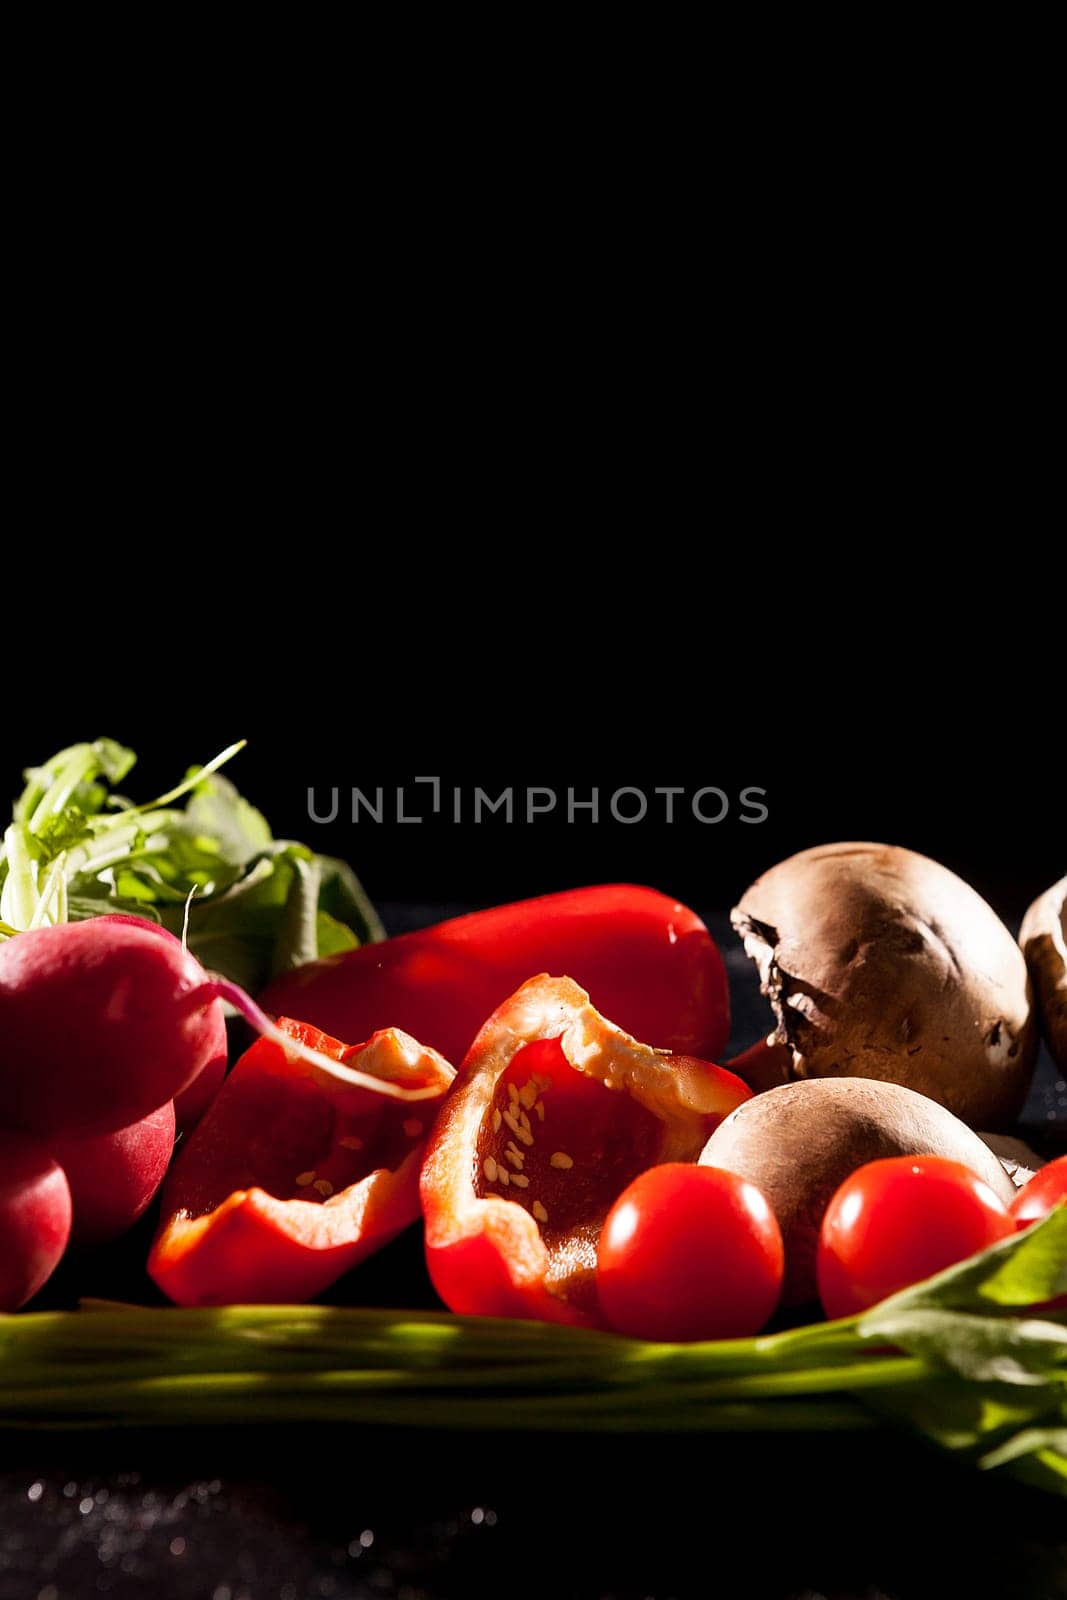 Artistic image of different type of healthy organic vegetables o by DCStudio